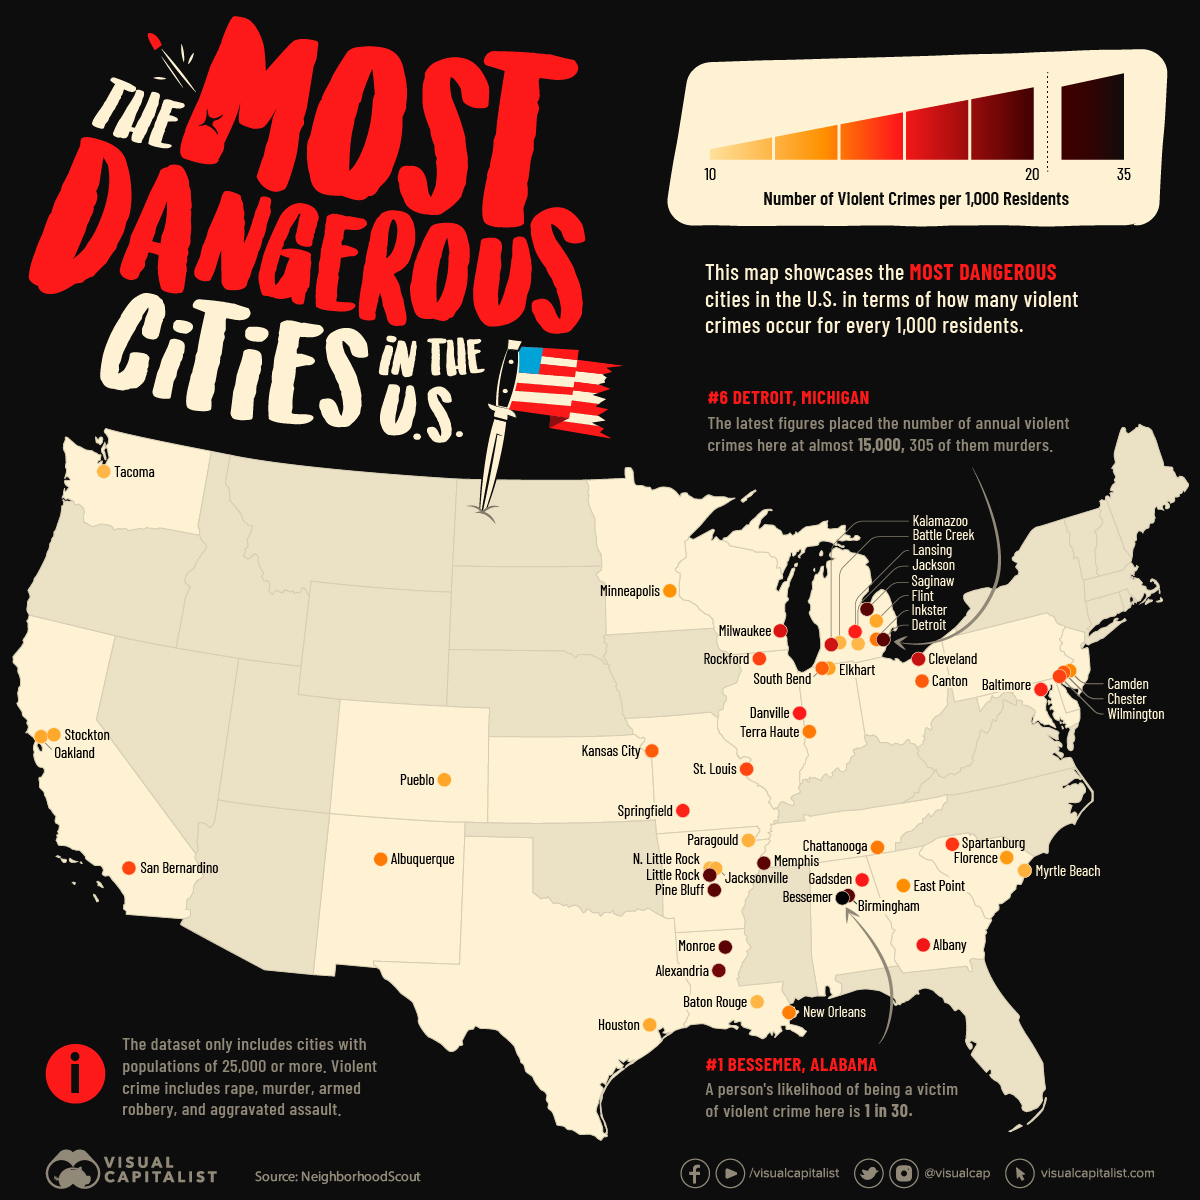 Mapped: The Most Dangerous Cities in the U.S.